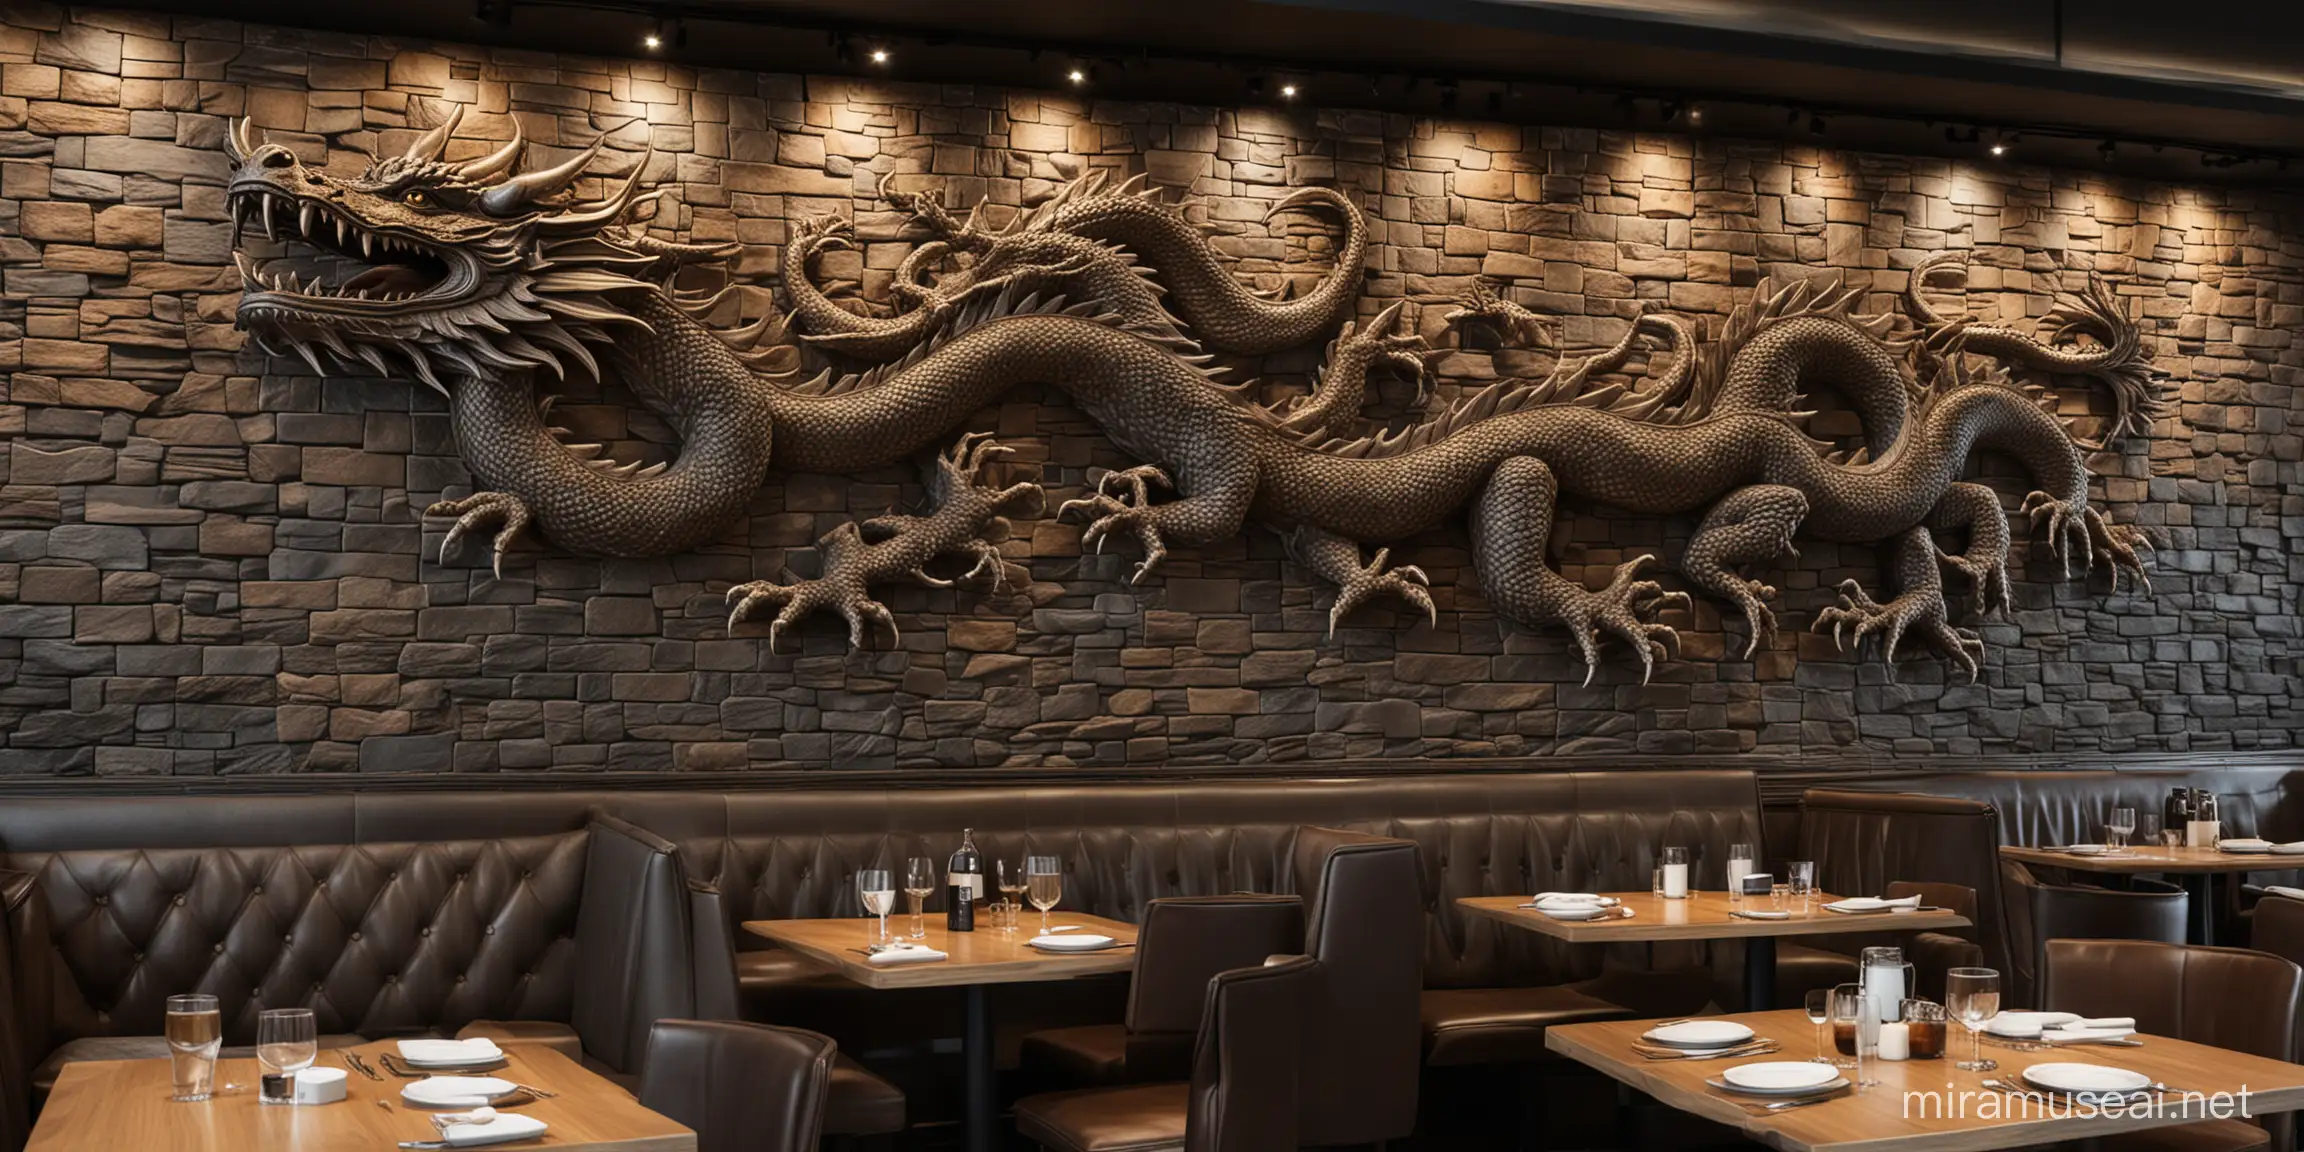 The wall adorned with a dragon motif at the modern café is a striking and impressive feature. The dragon image is intricately depicted on the wall, creating a unique and artistic space. Lighting is used to highlight and add depth to the image, providing an engaging experience for customers.